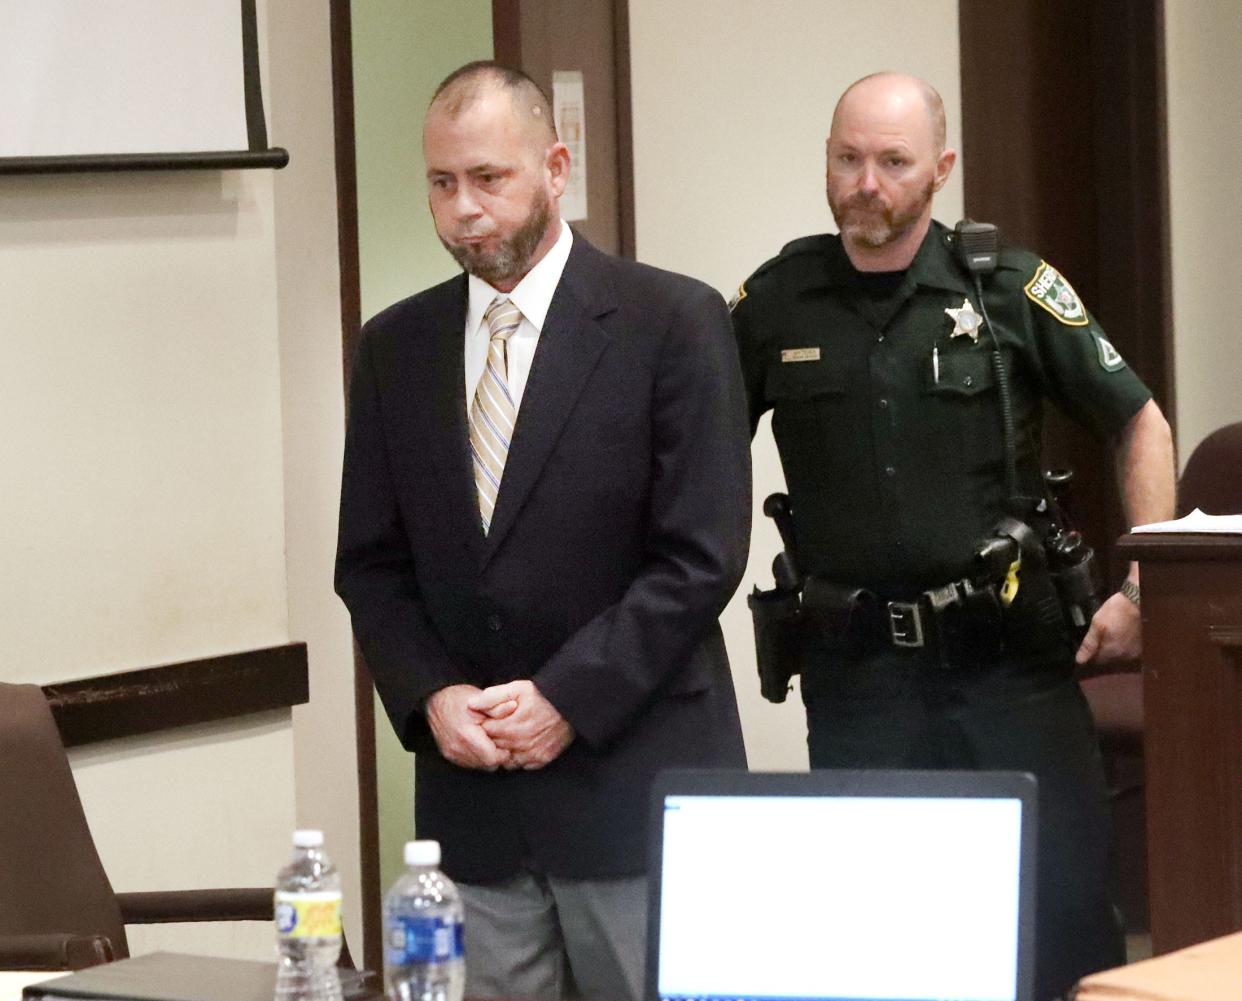 Damian DeRousha is escorted to the defense table by a Volusia County Sheriff's Office bailiff, Tuesday, May 17, 2022, before the start of his trial in the shooting death of Donald Geno in 2021.